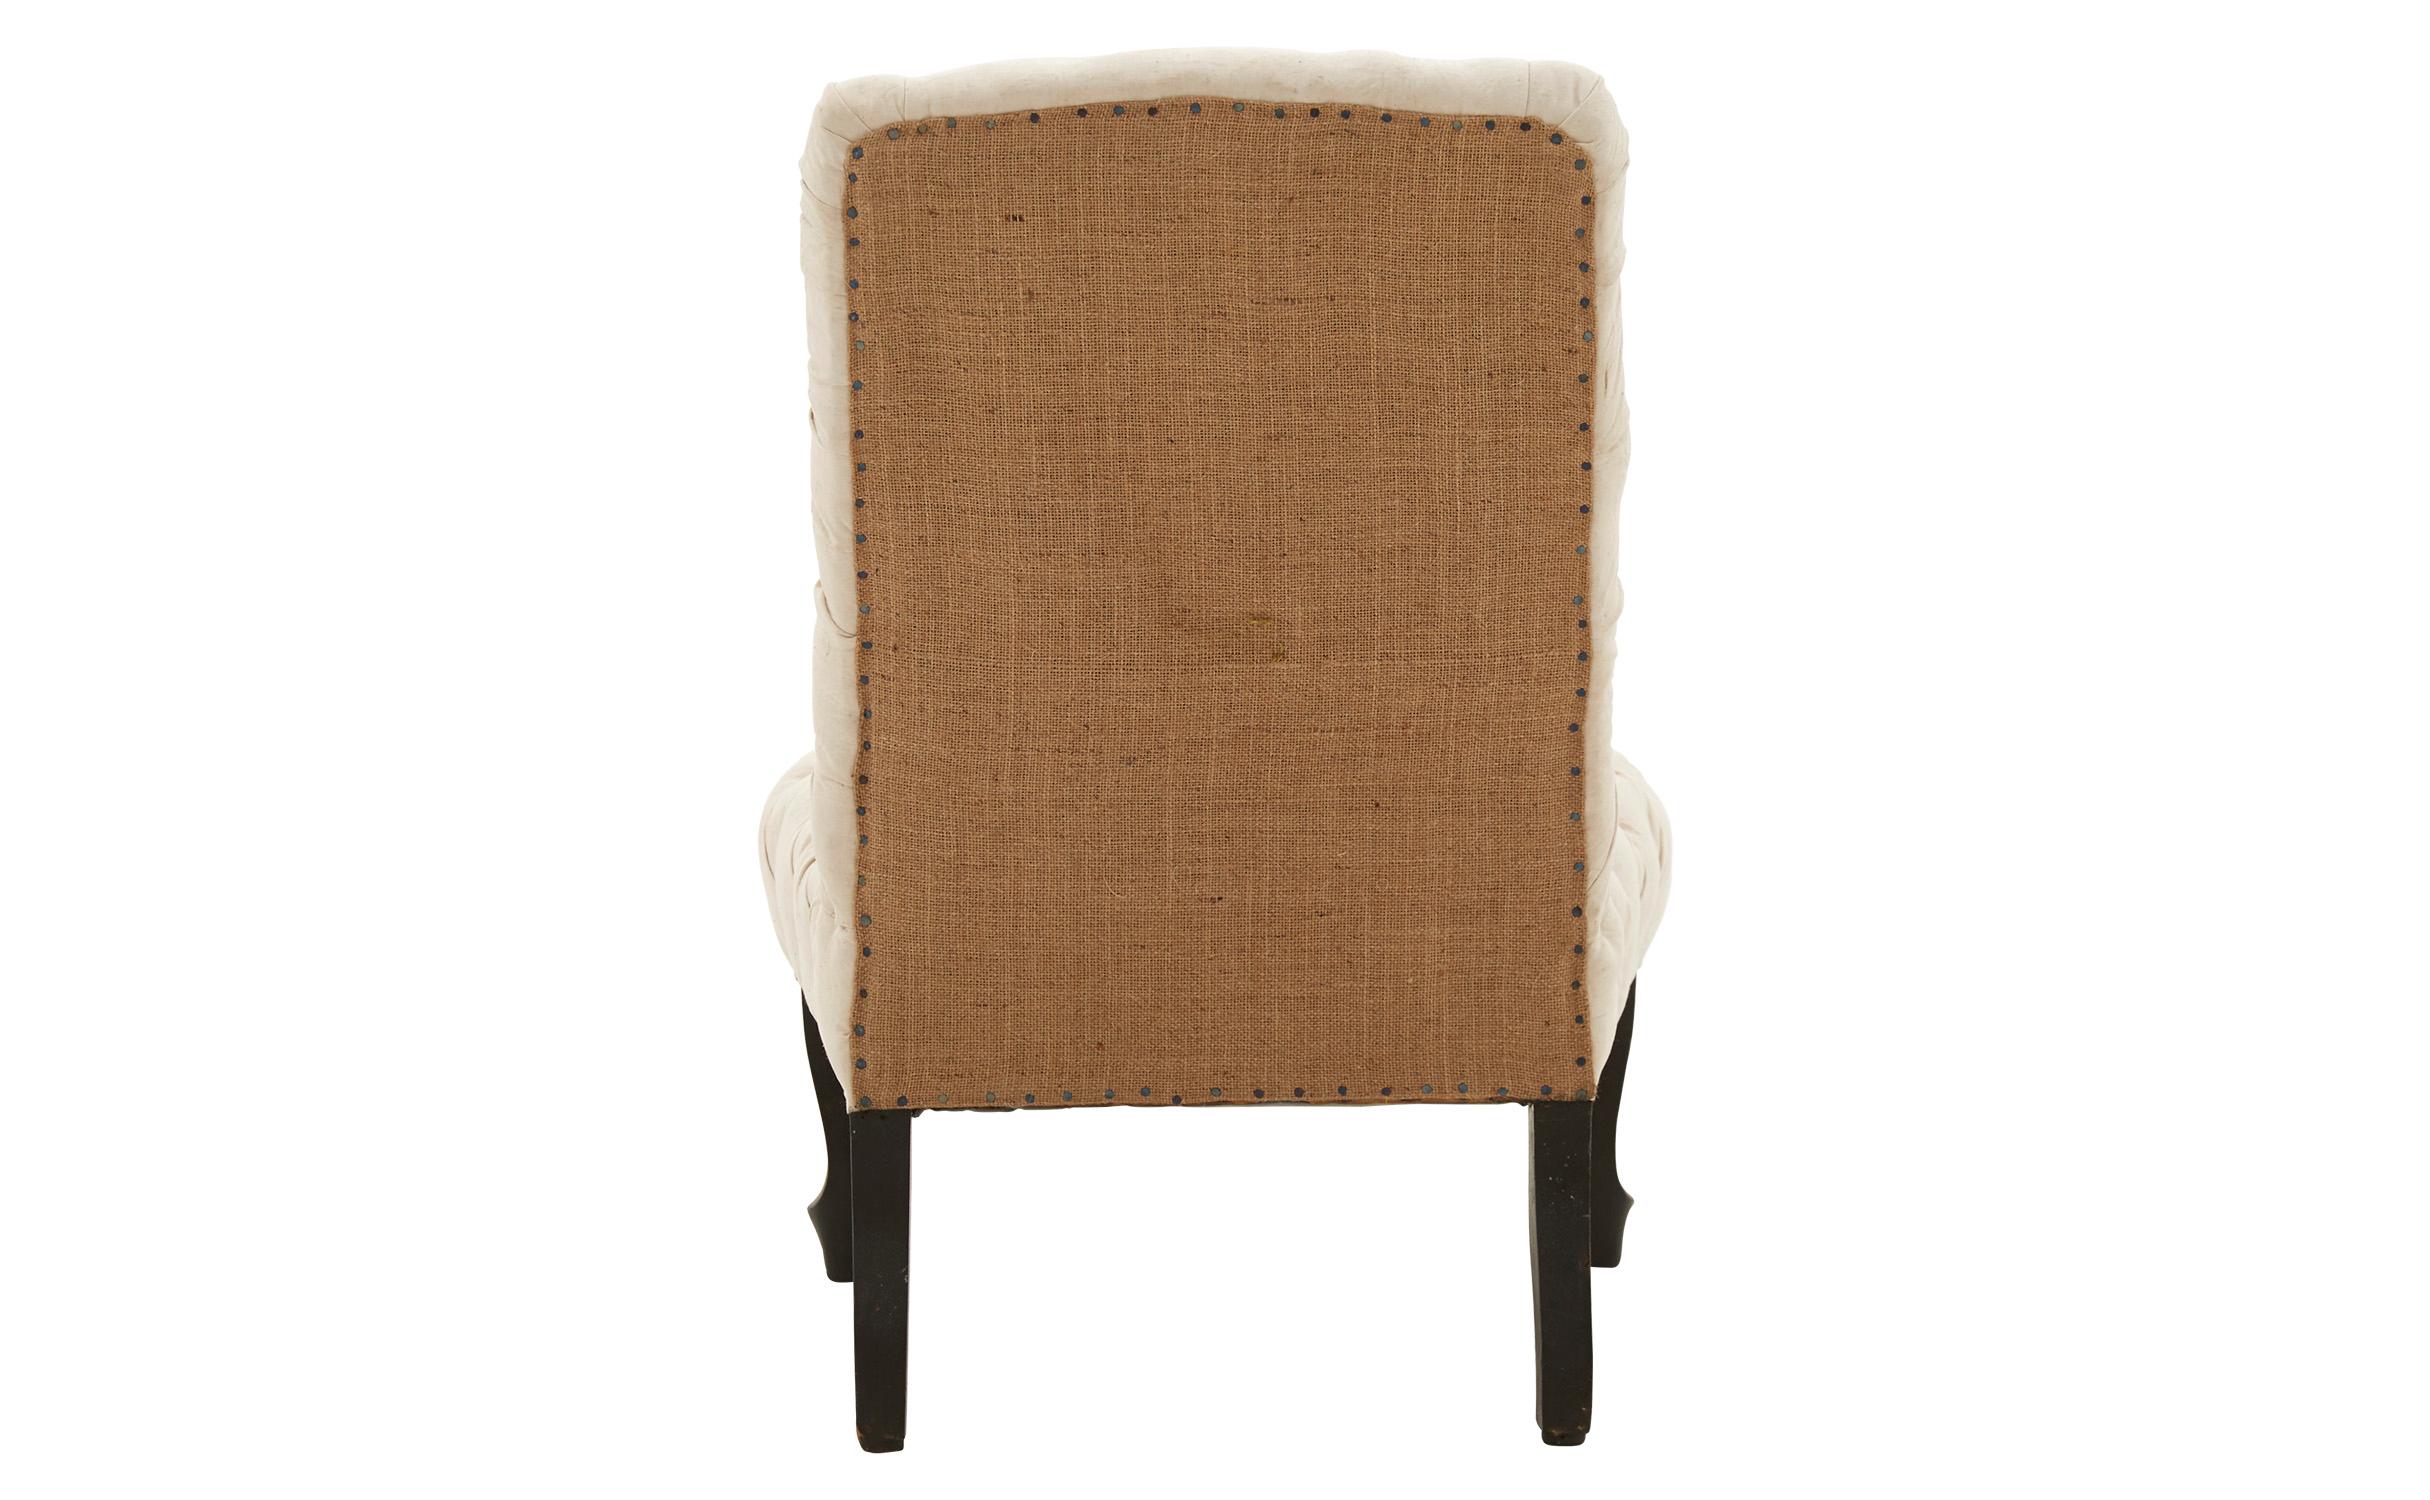 French Unupholstered Muslin and Burlap Tufted Slipper Chair